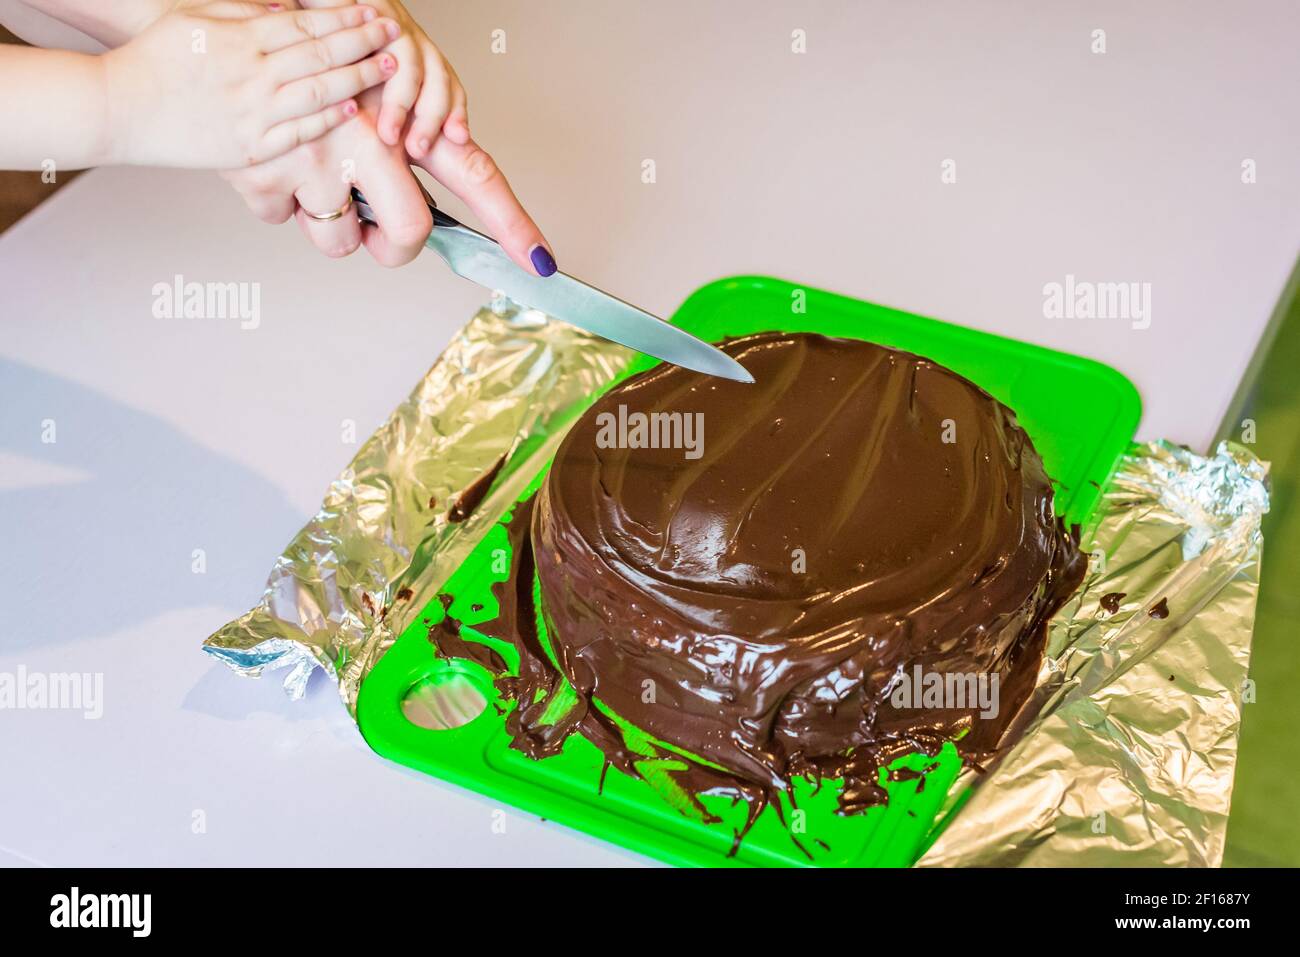 Baby hands cut the cake Stock Photo